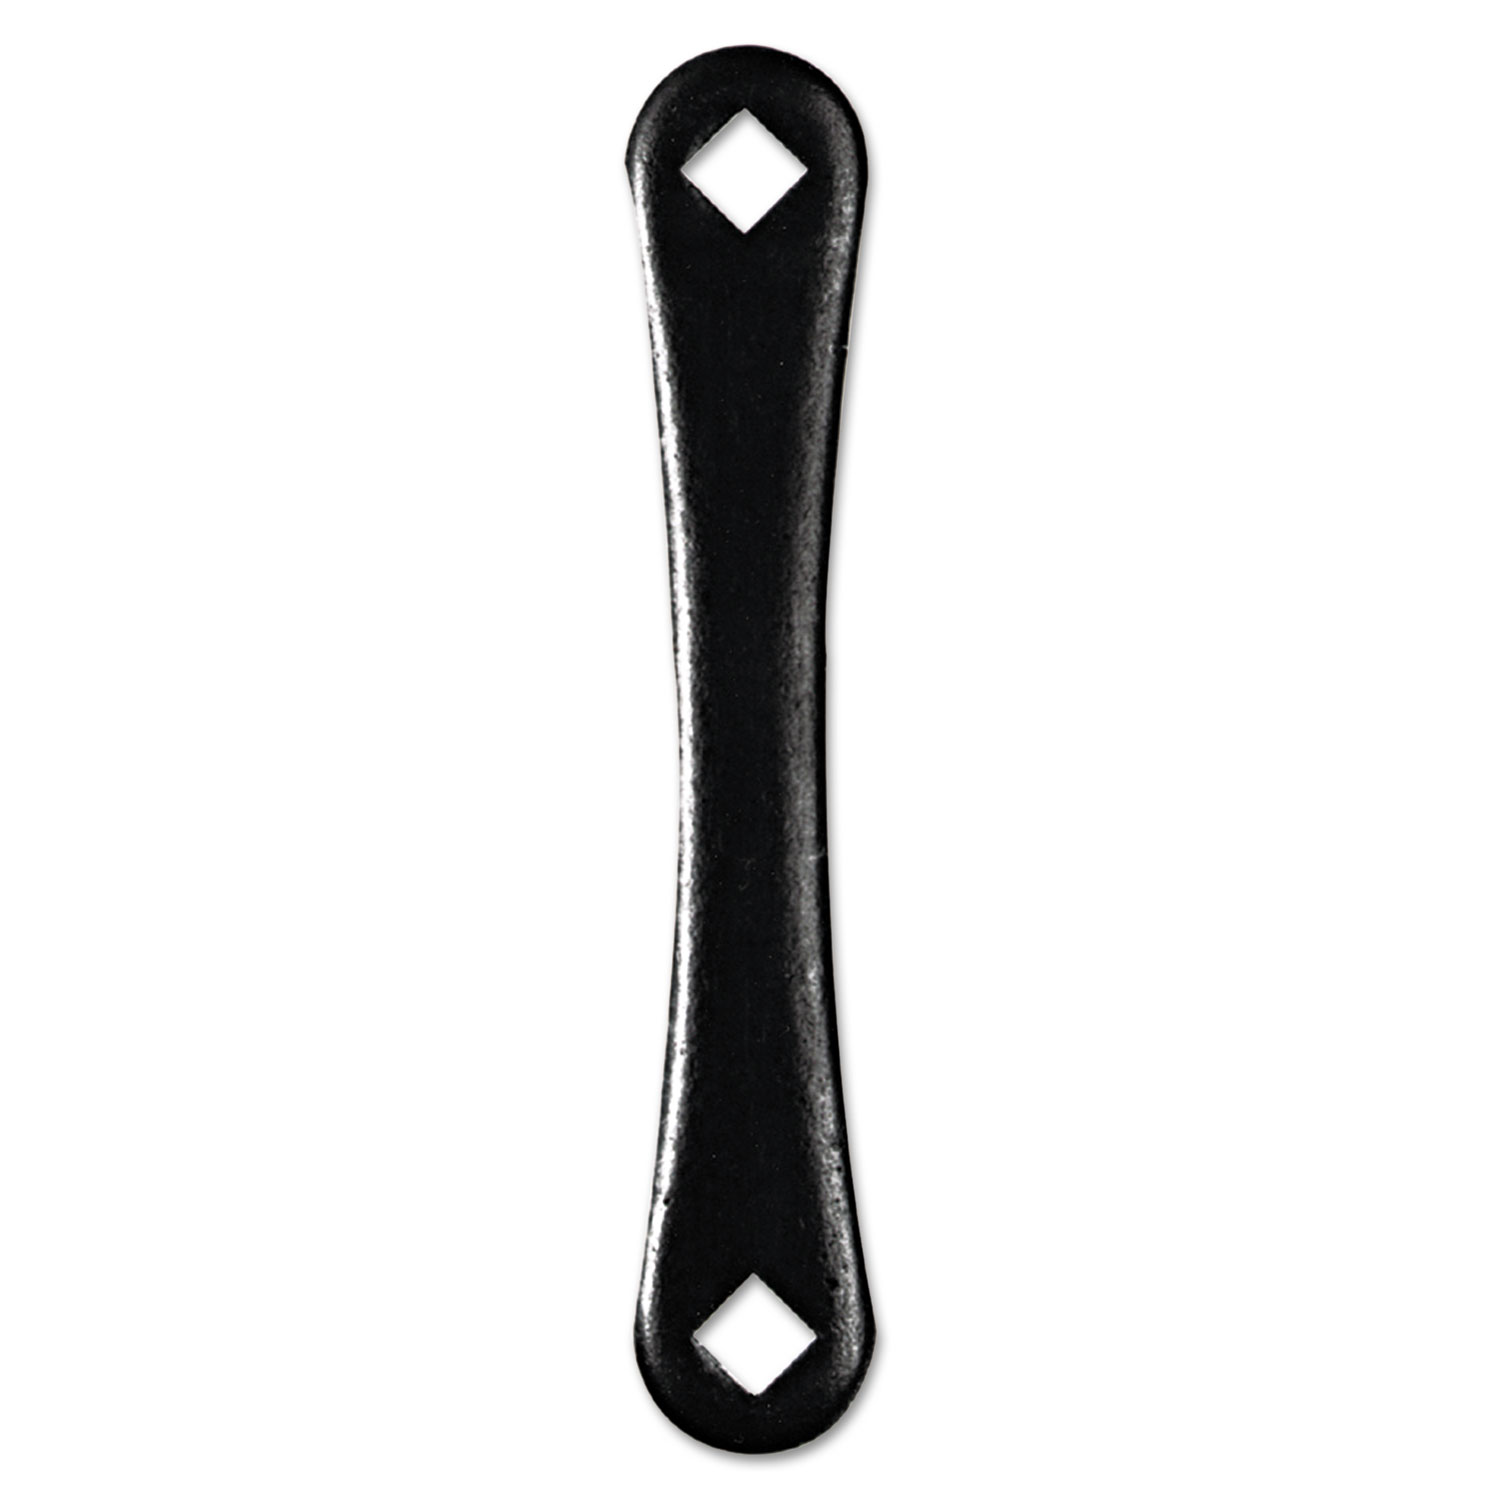 No. 5 Acetylene-Valve Box Wrench, 3 1/8 Tool Length, .194 Opening, Black Oxide